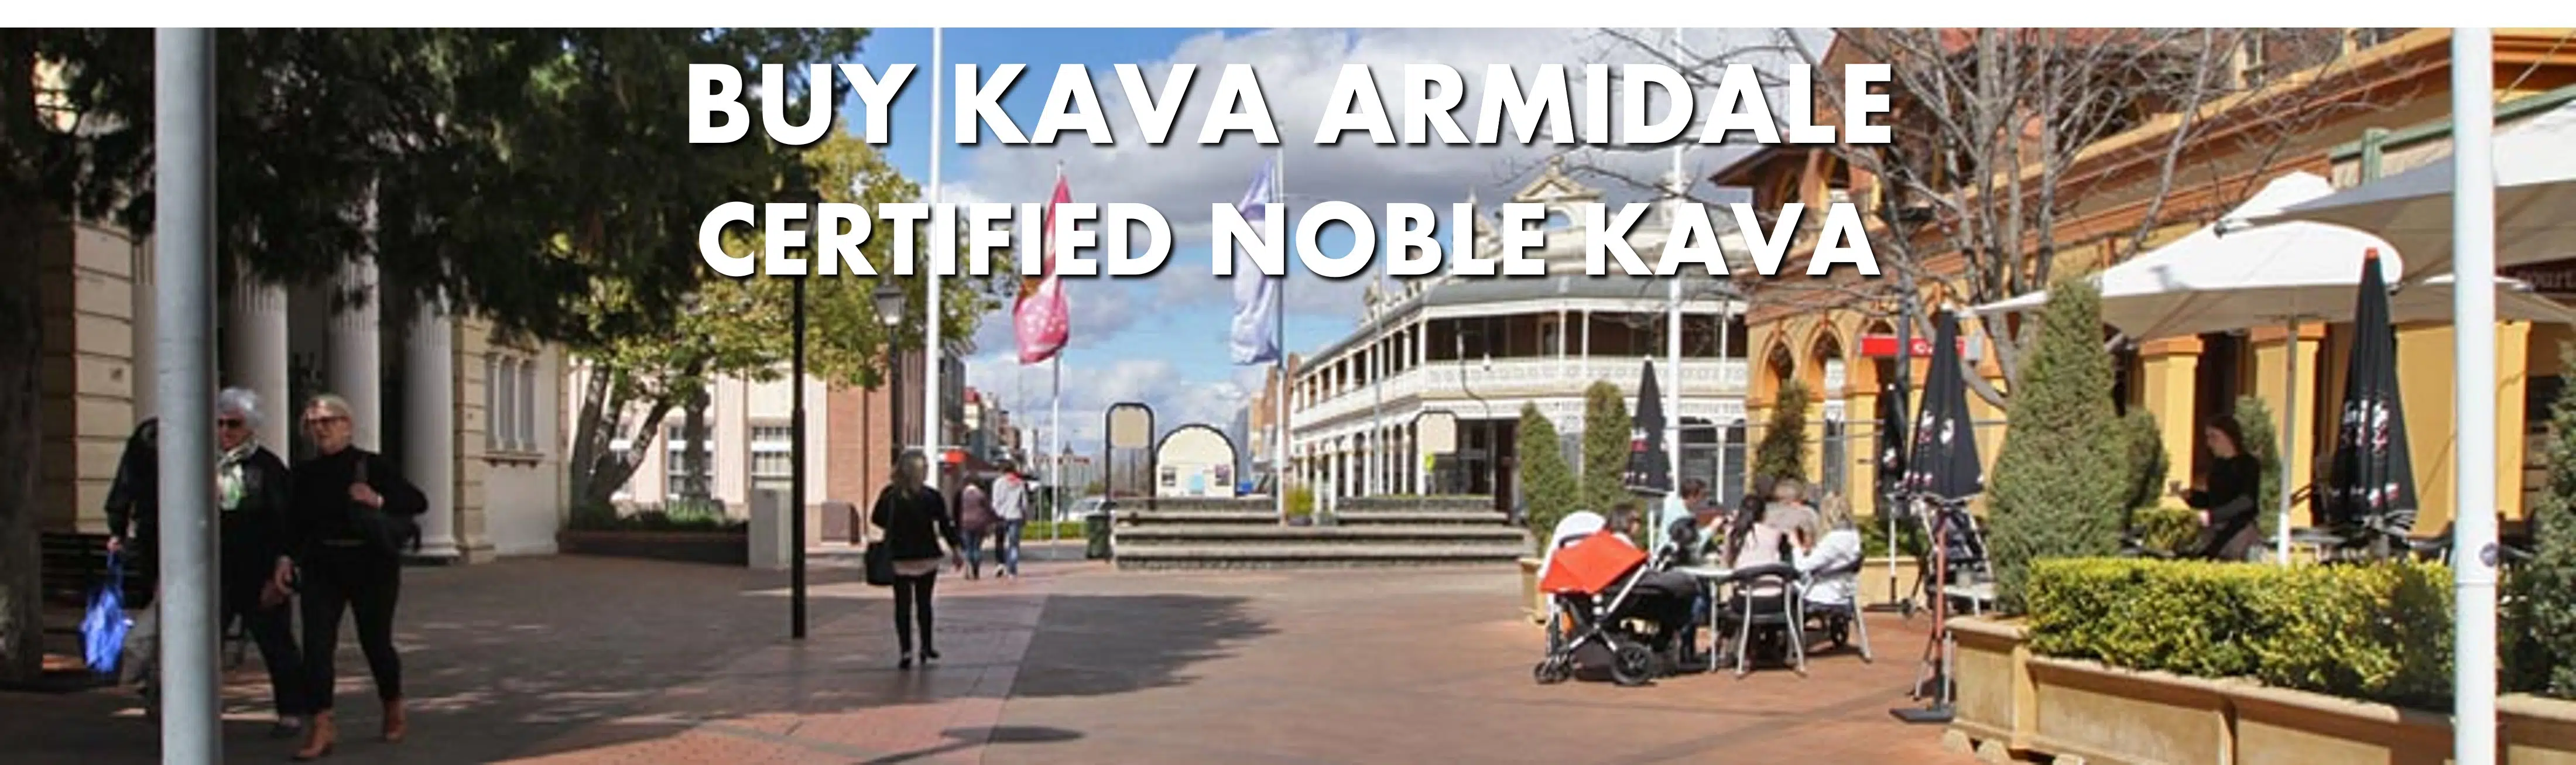 Street scene in Armidale New South Wales with caption Buy Kava Armidale Certified Noble Kava